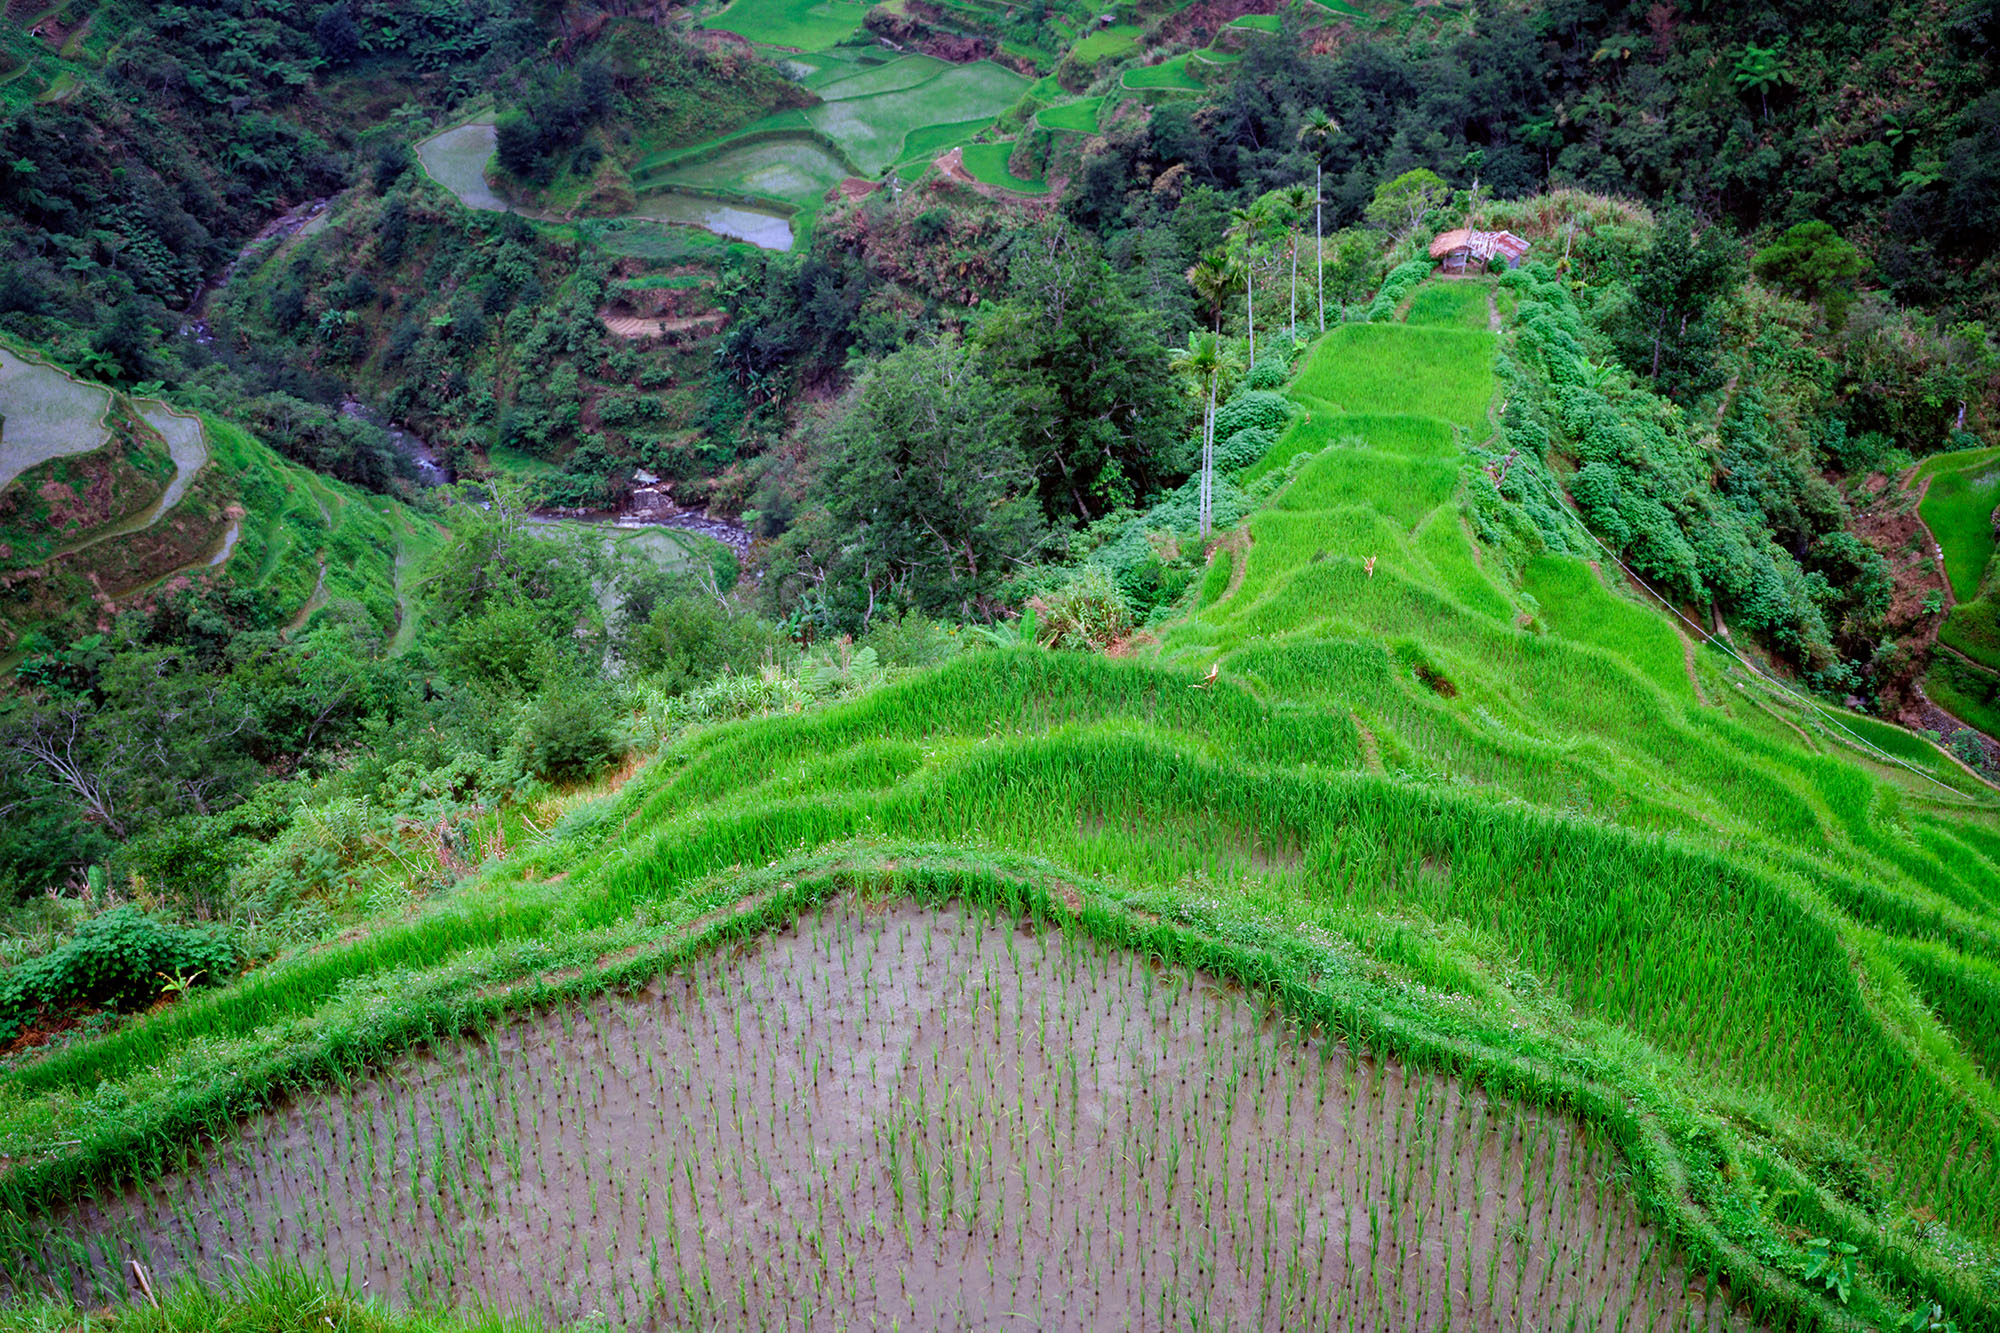 Captured with a Bronica ETRSi camera on Velvia 50 film, this photograph unveils the vibrant beauty of the Banaue Rice Terraces...